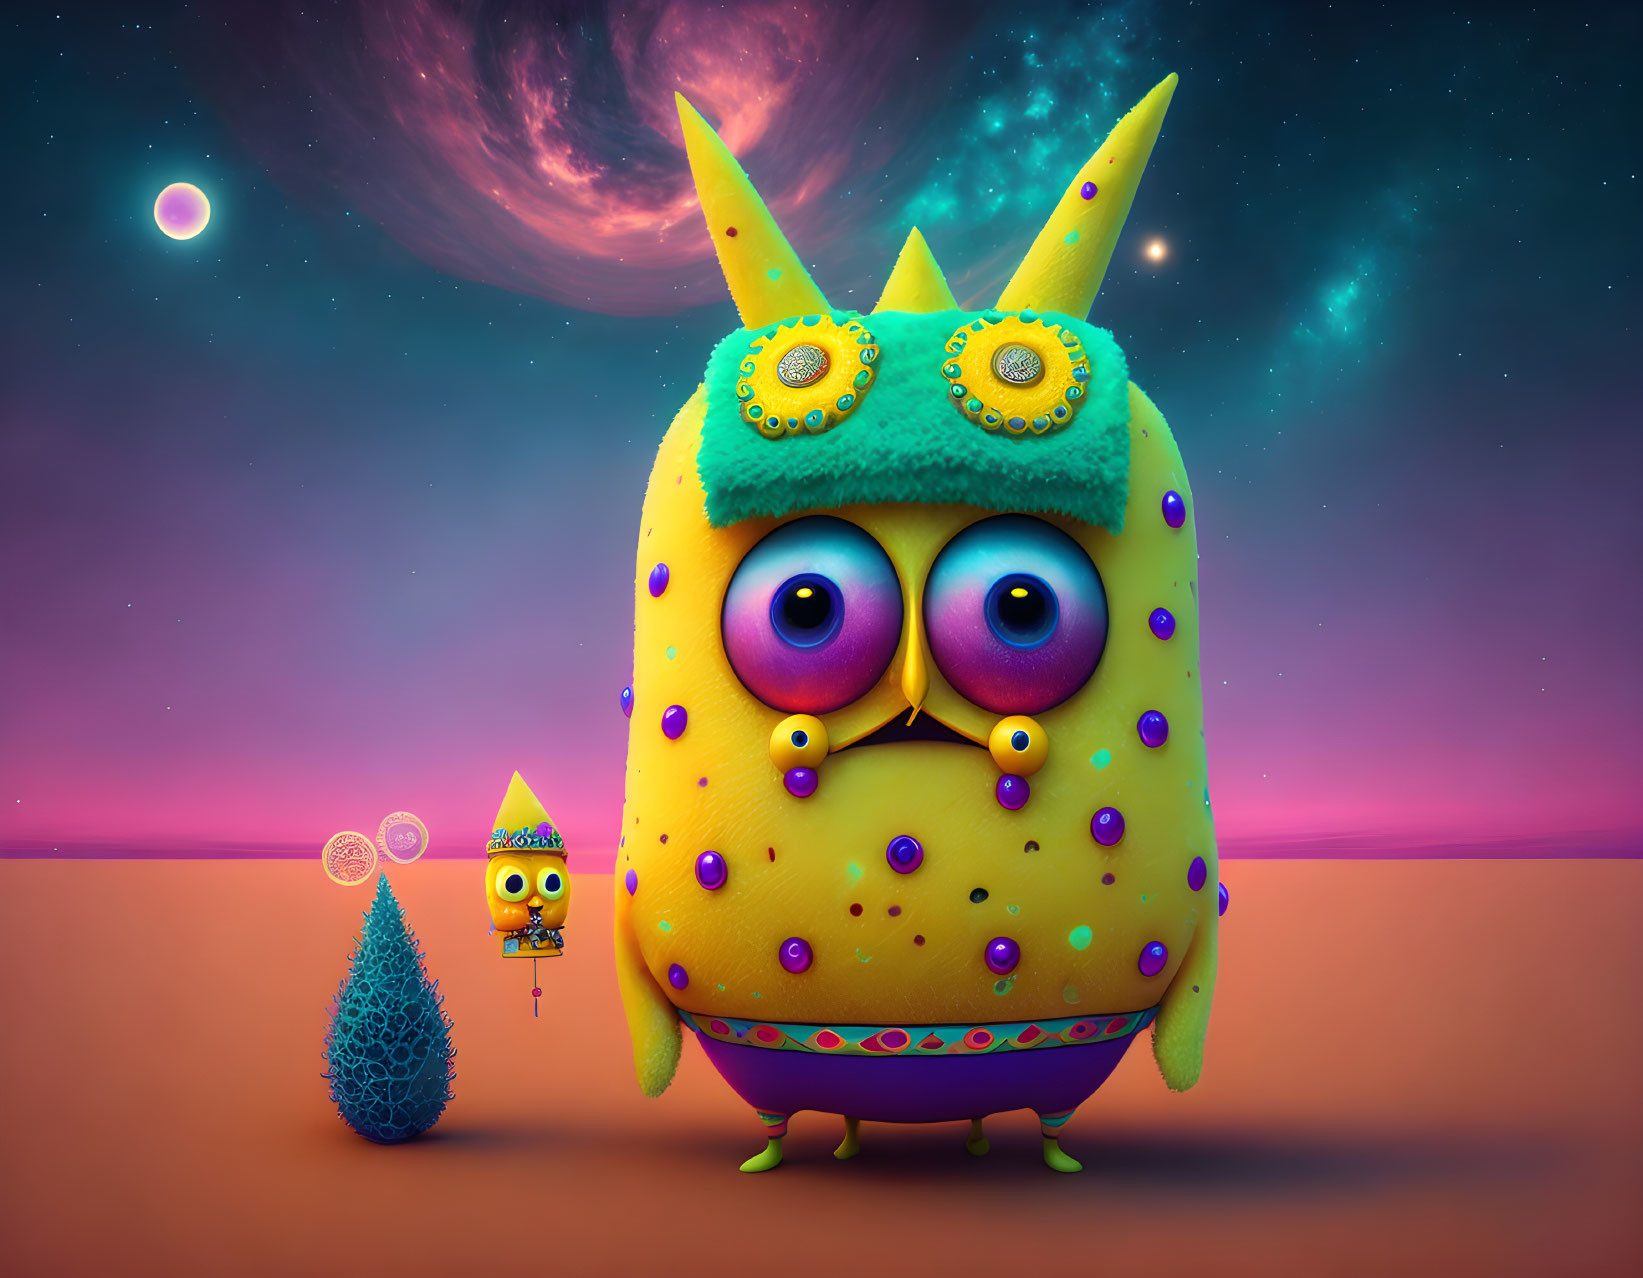 Colorful Creatures in Surreal Alien Landscape with Planet